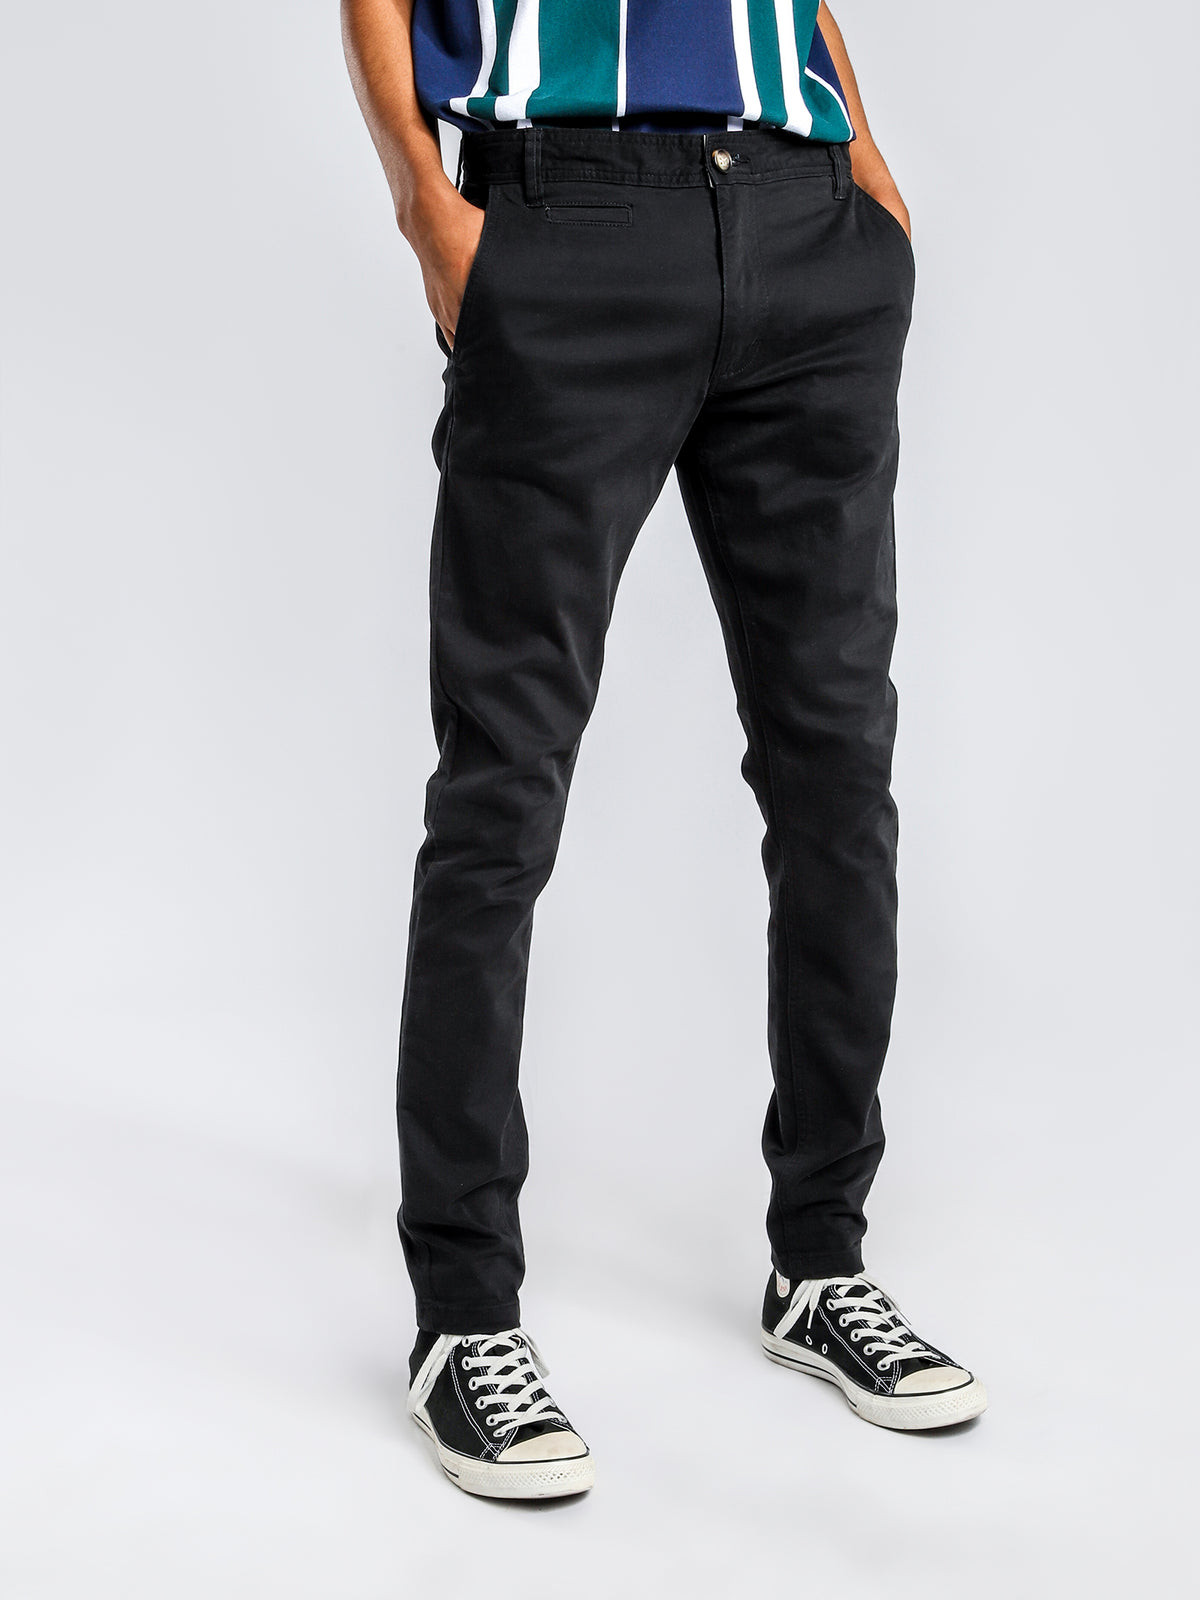 Linden Chino Pants in Black